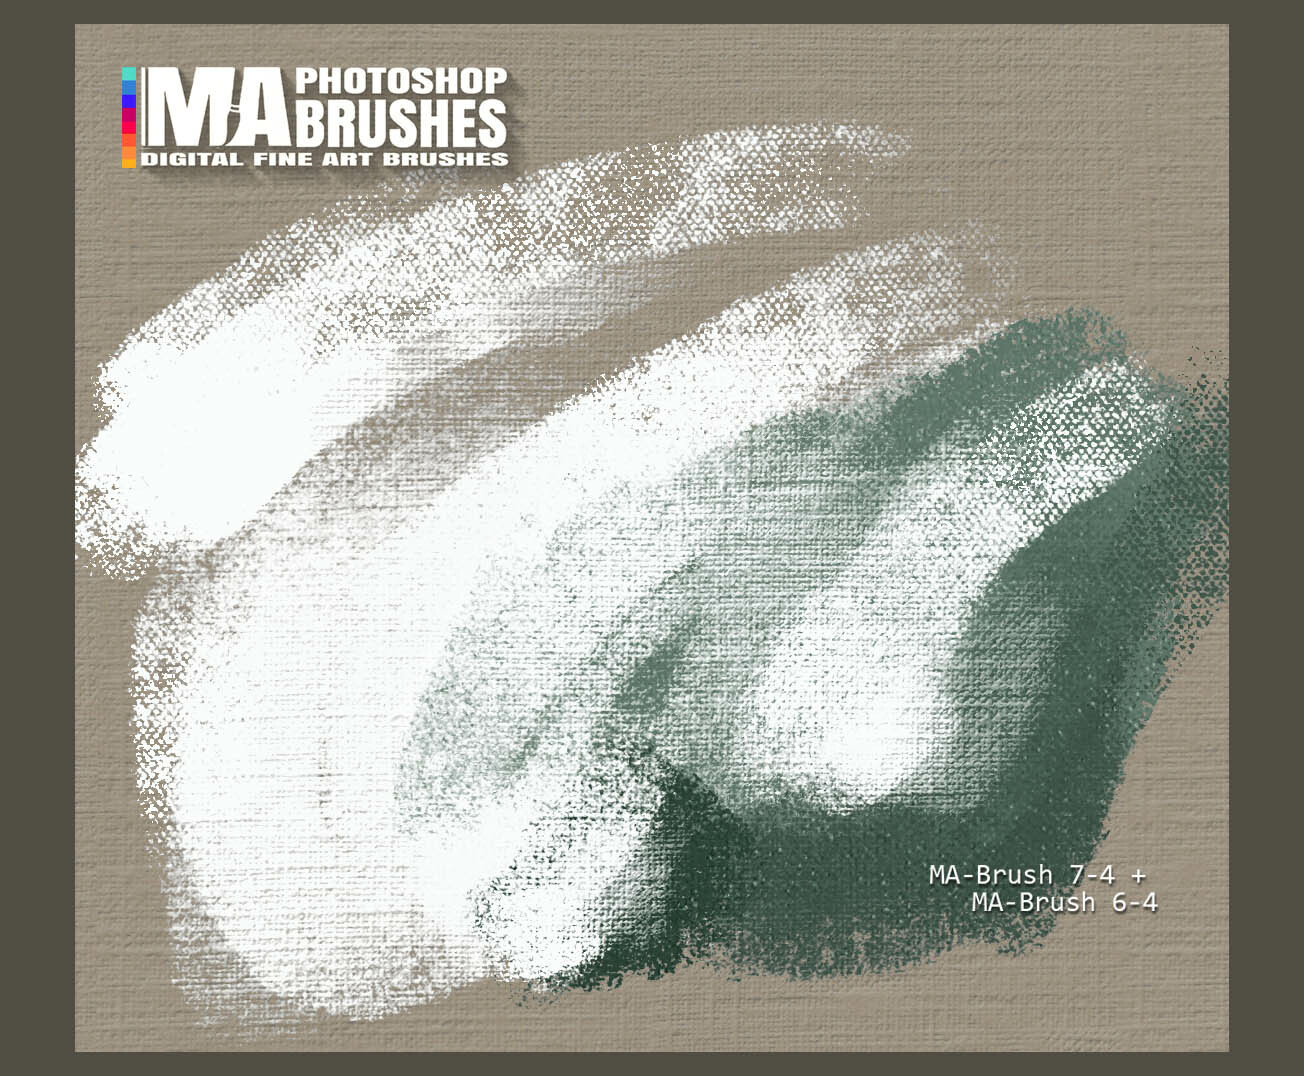 Exploring the MA-Brushes. MA-Brush 6-4 and 7-4 for Canvas Effects / Digital Art Brushes